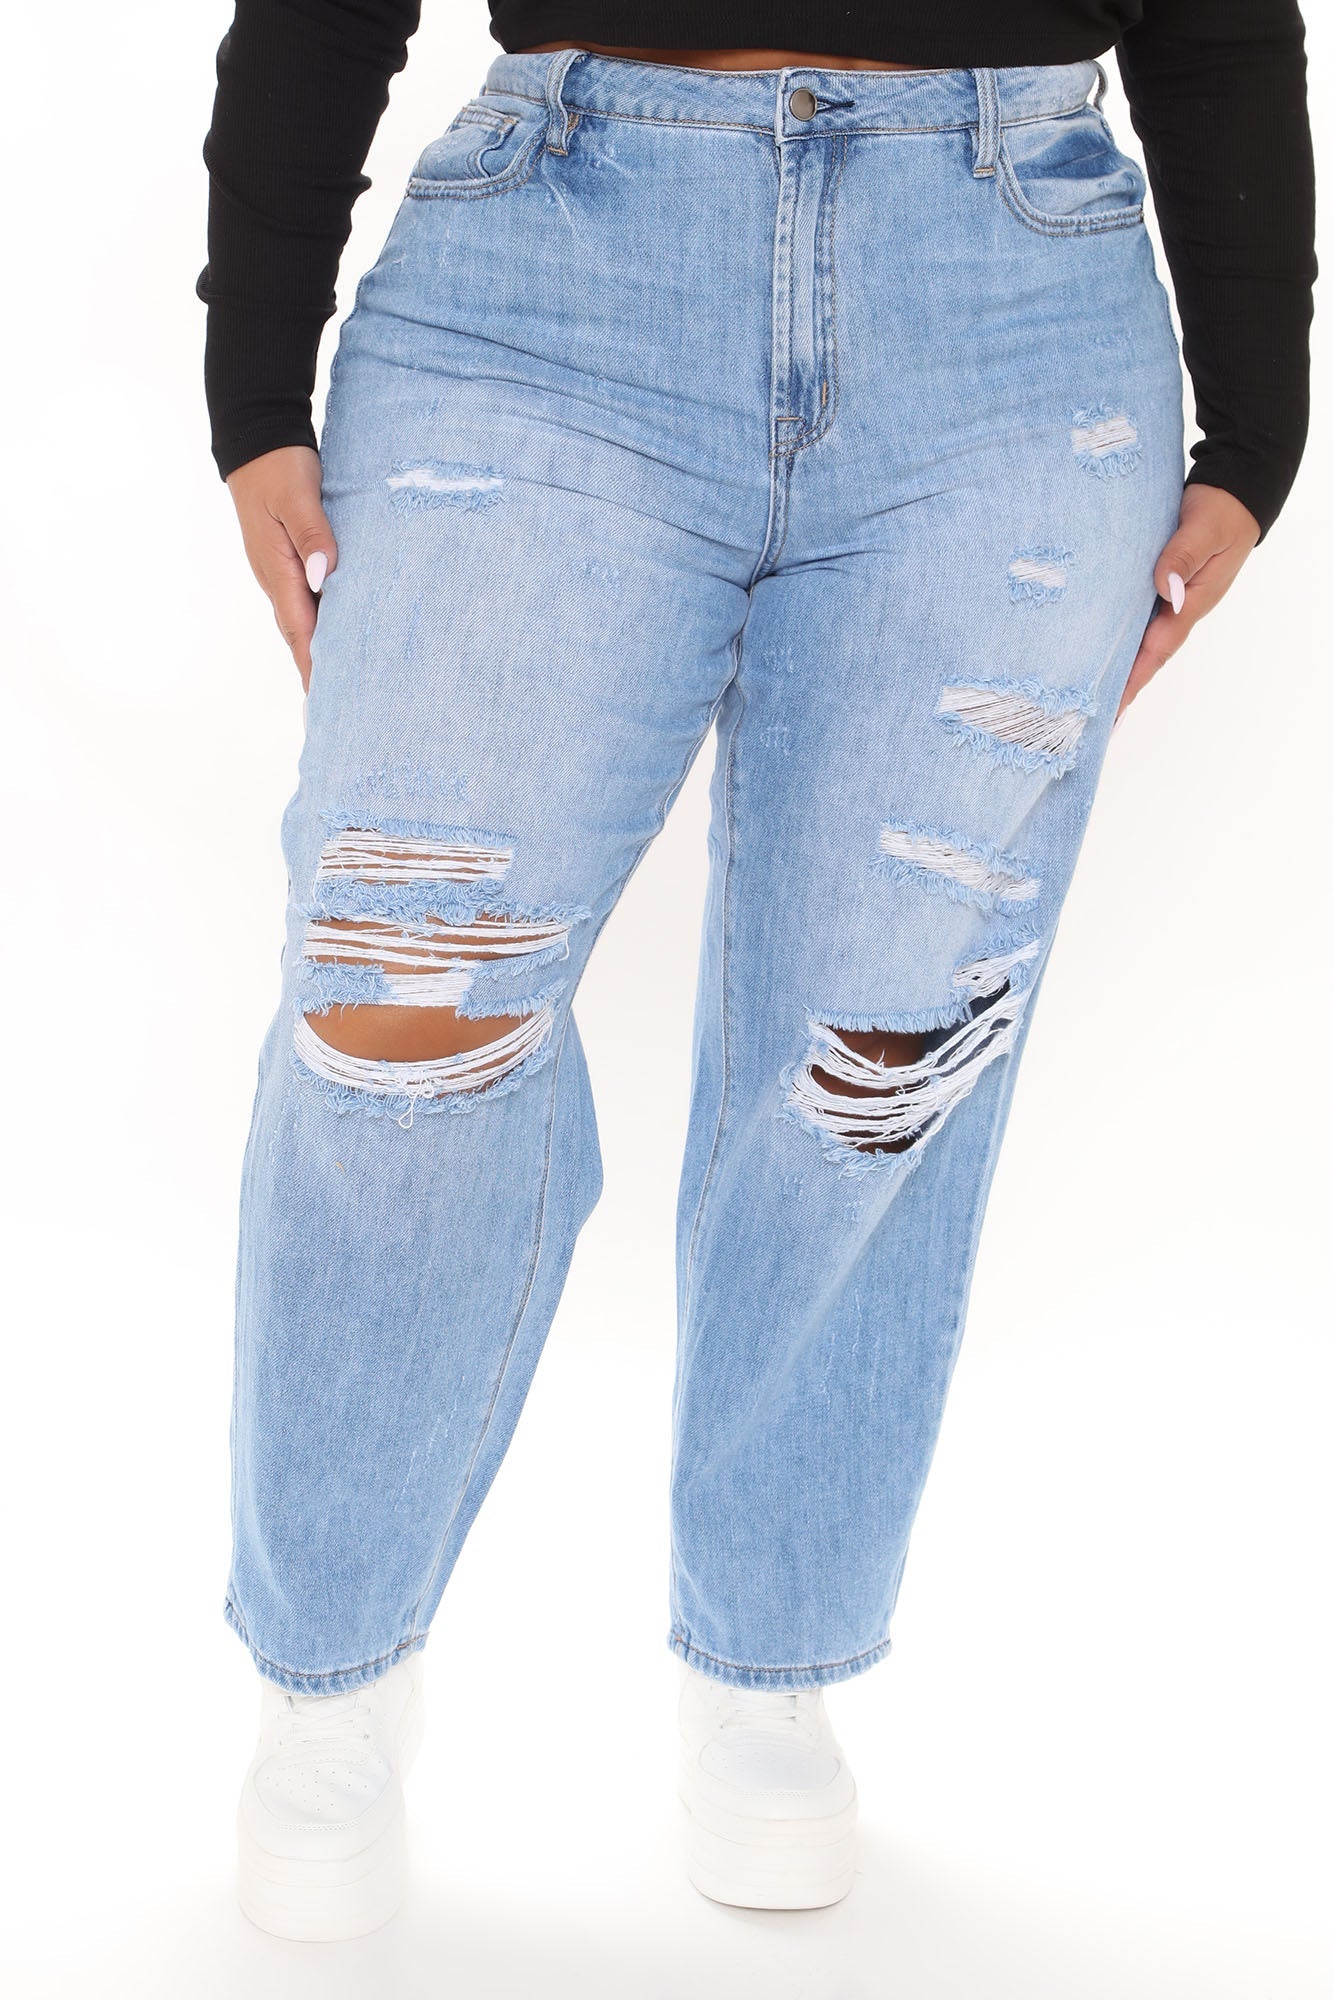 Why Don't You Relax Ripped Mom Jeans - Medium Blue Wash – InsStreet